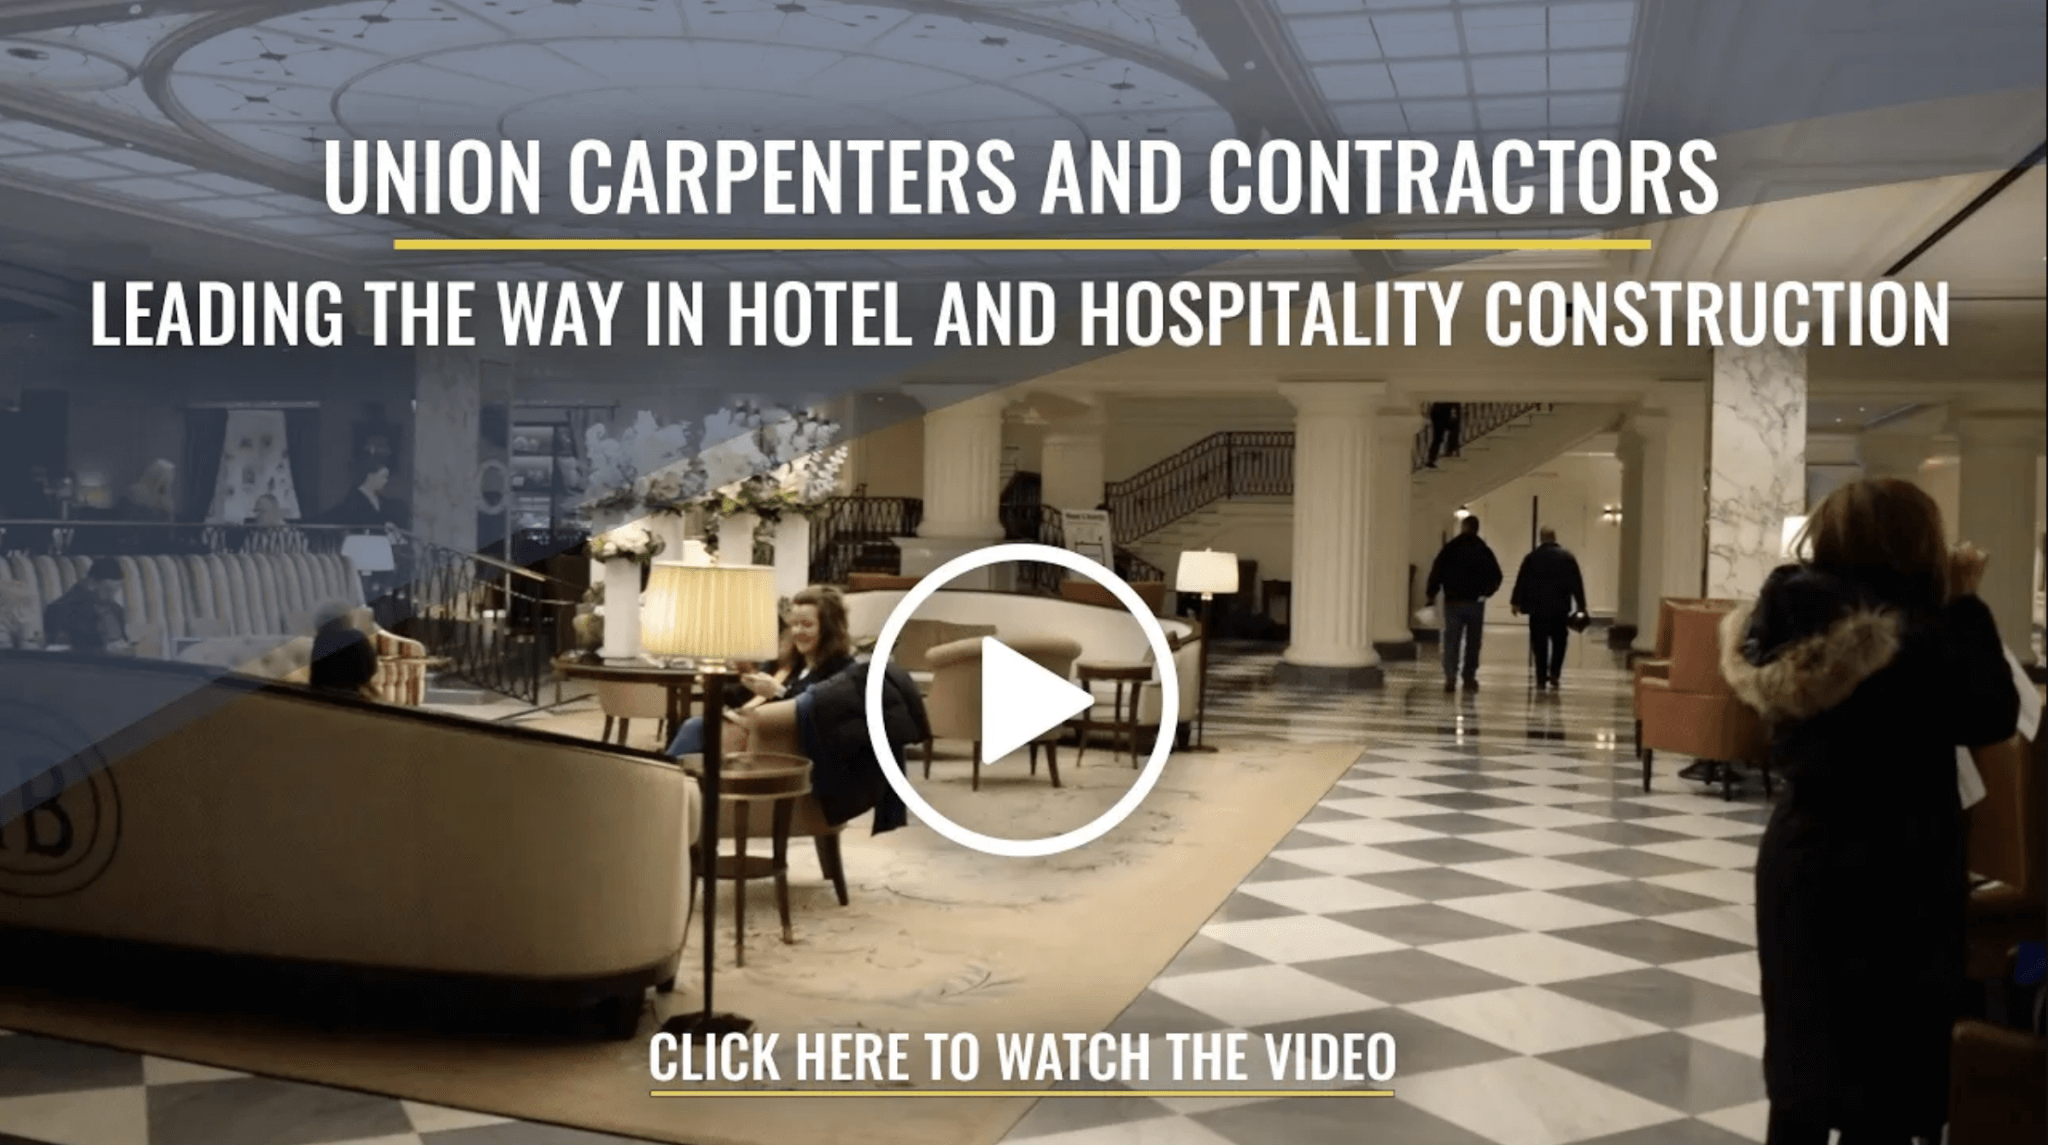 Union Carpenters and Contractors - Leading the way in hotel and hospitality construction